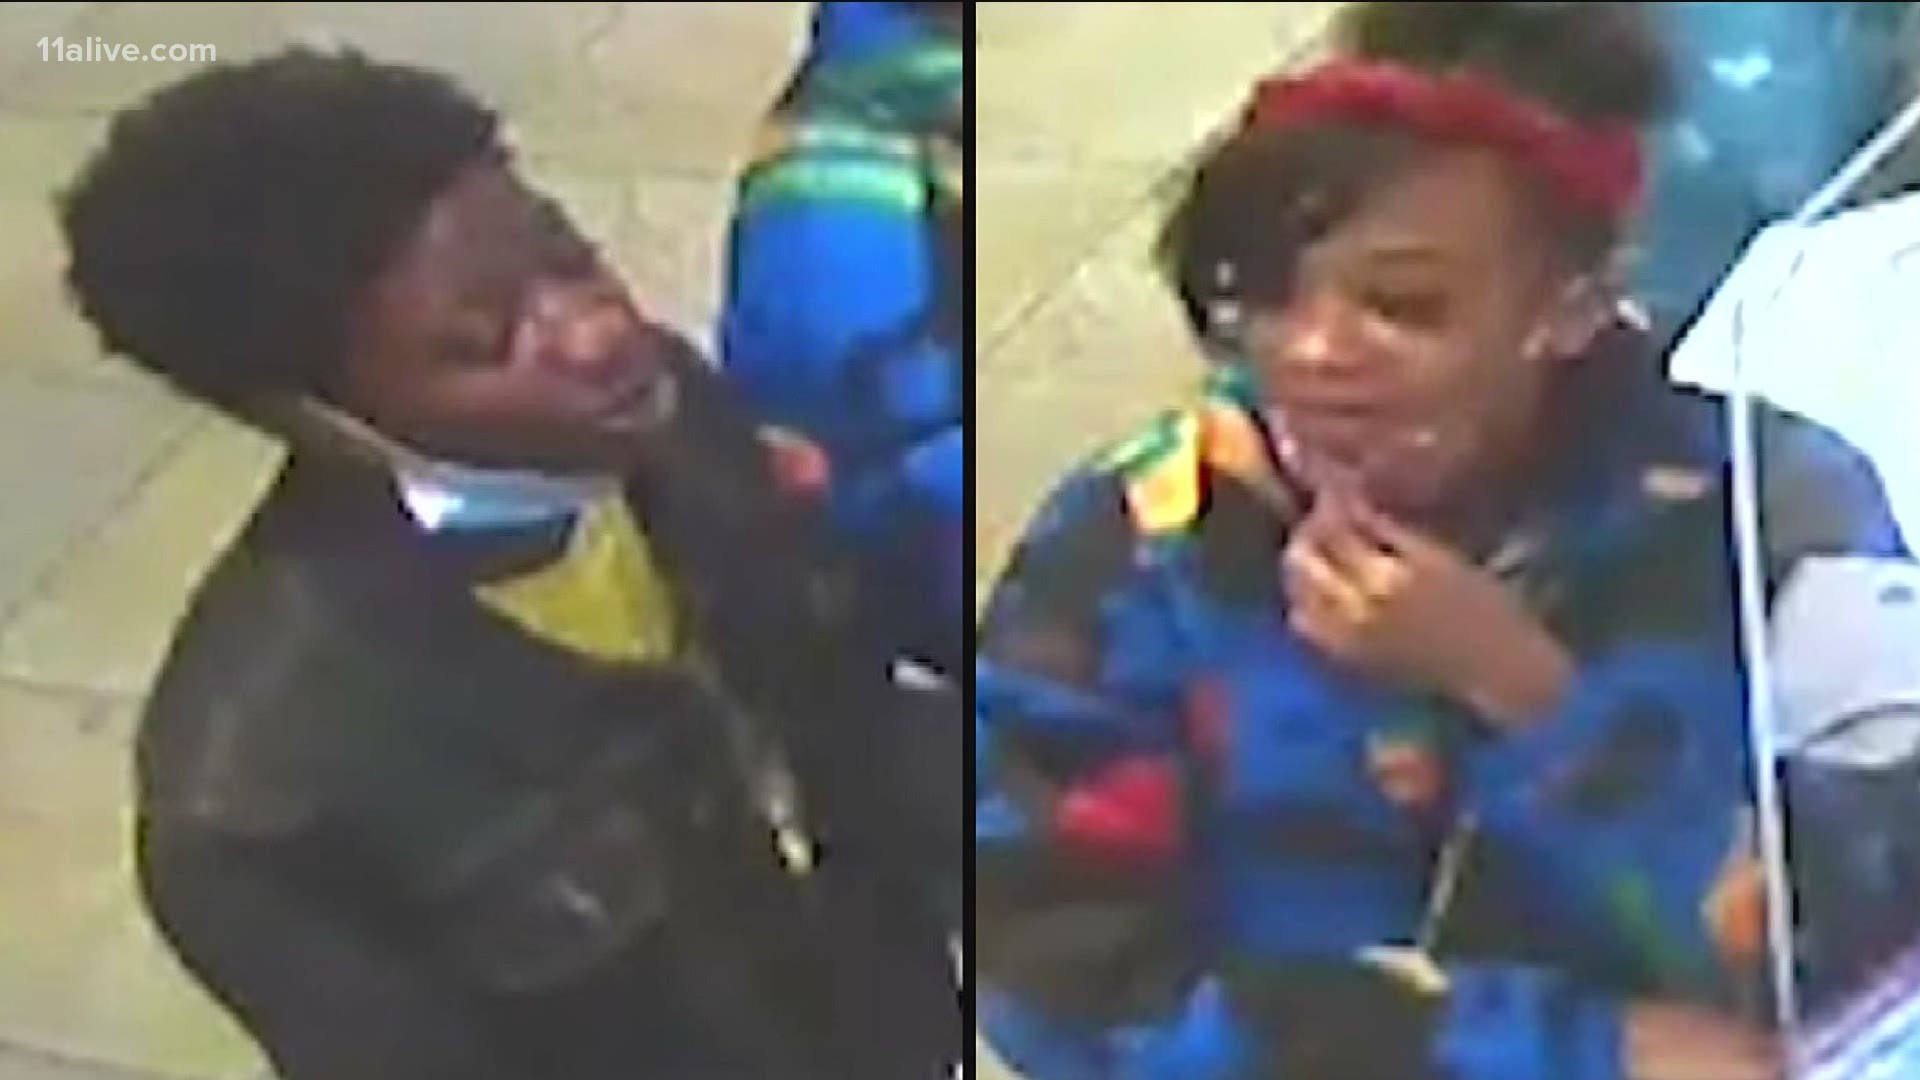 Anyone who recognizes the two people is asked to call police.